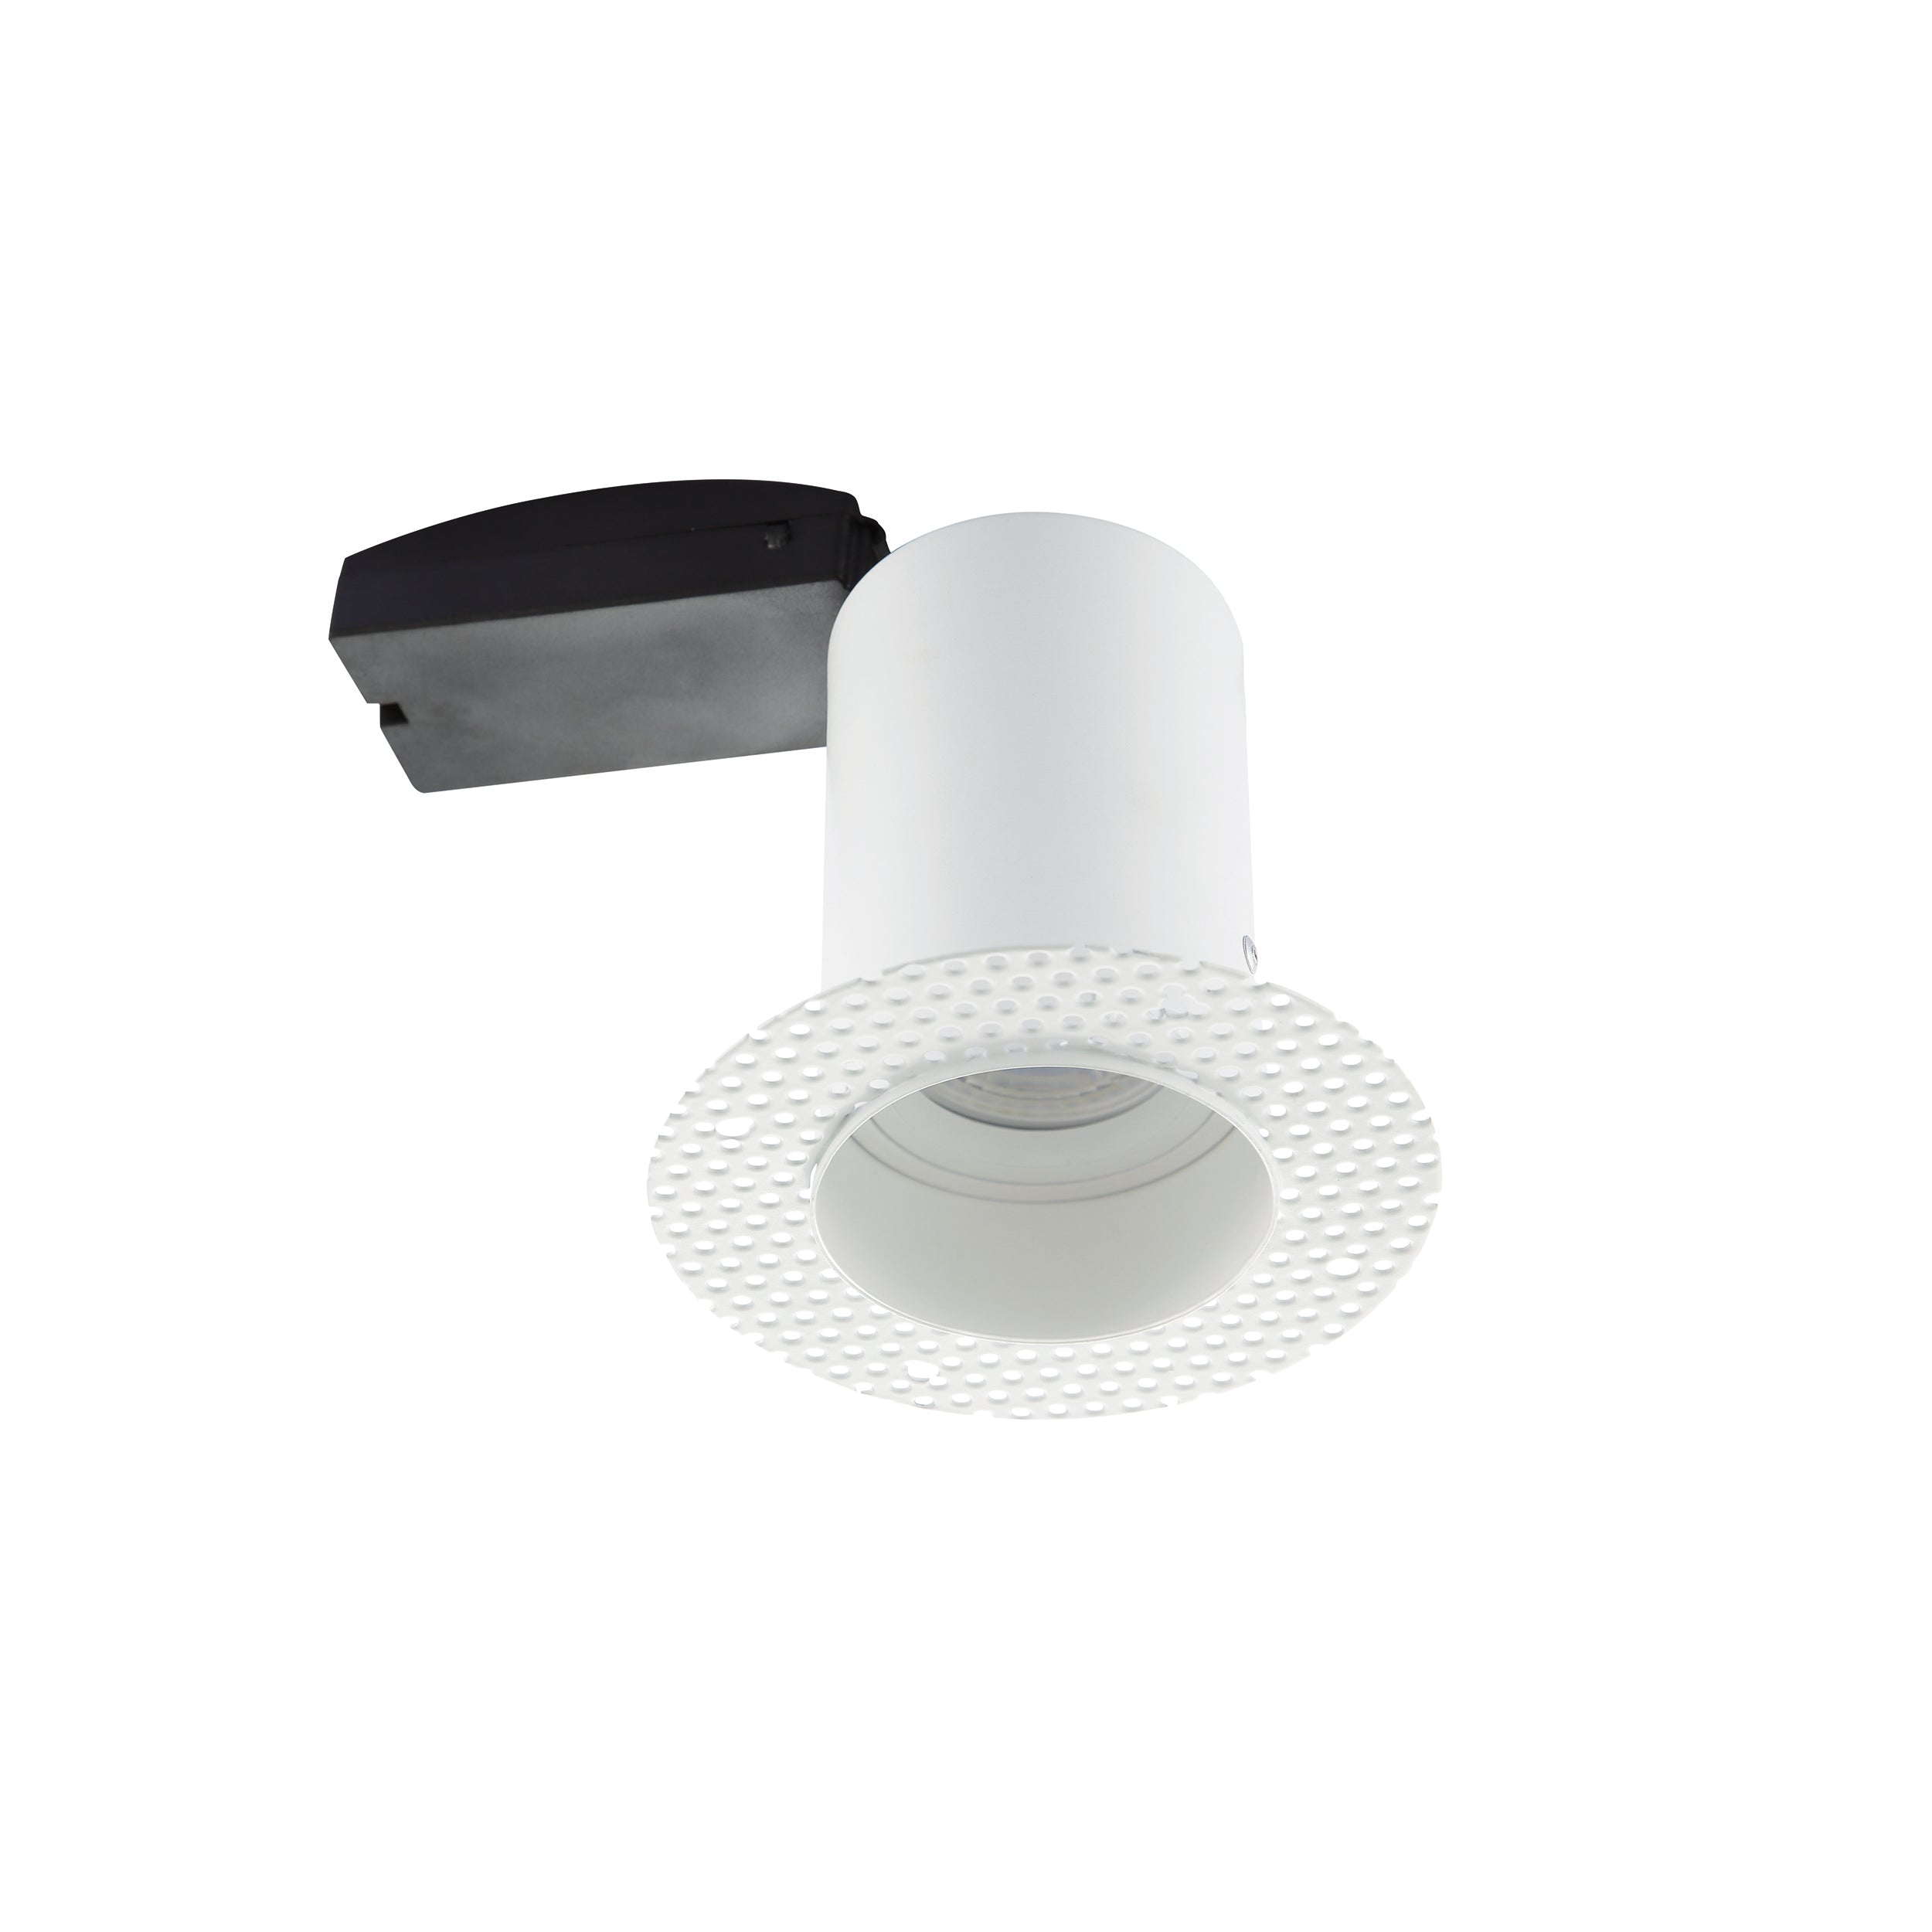 Saxby 81572 Ravel Trimless Plaster-in Fire Rated GU10 Downlight